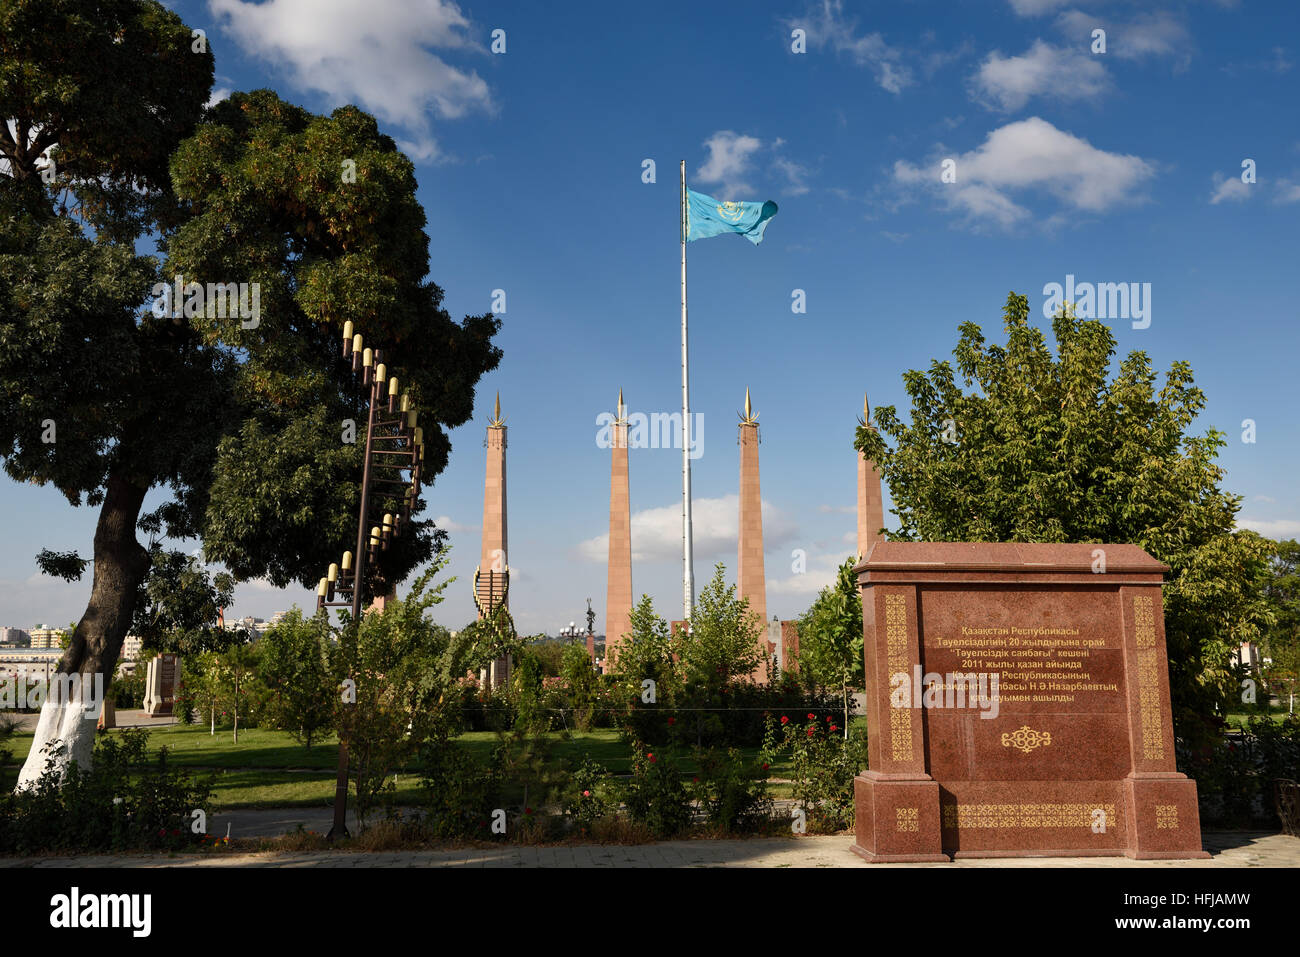 Granite memorial plaque and columns with Kazakh flag in Independence Park Shymkent Kazakhstan Stock Photo